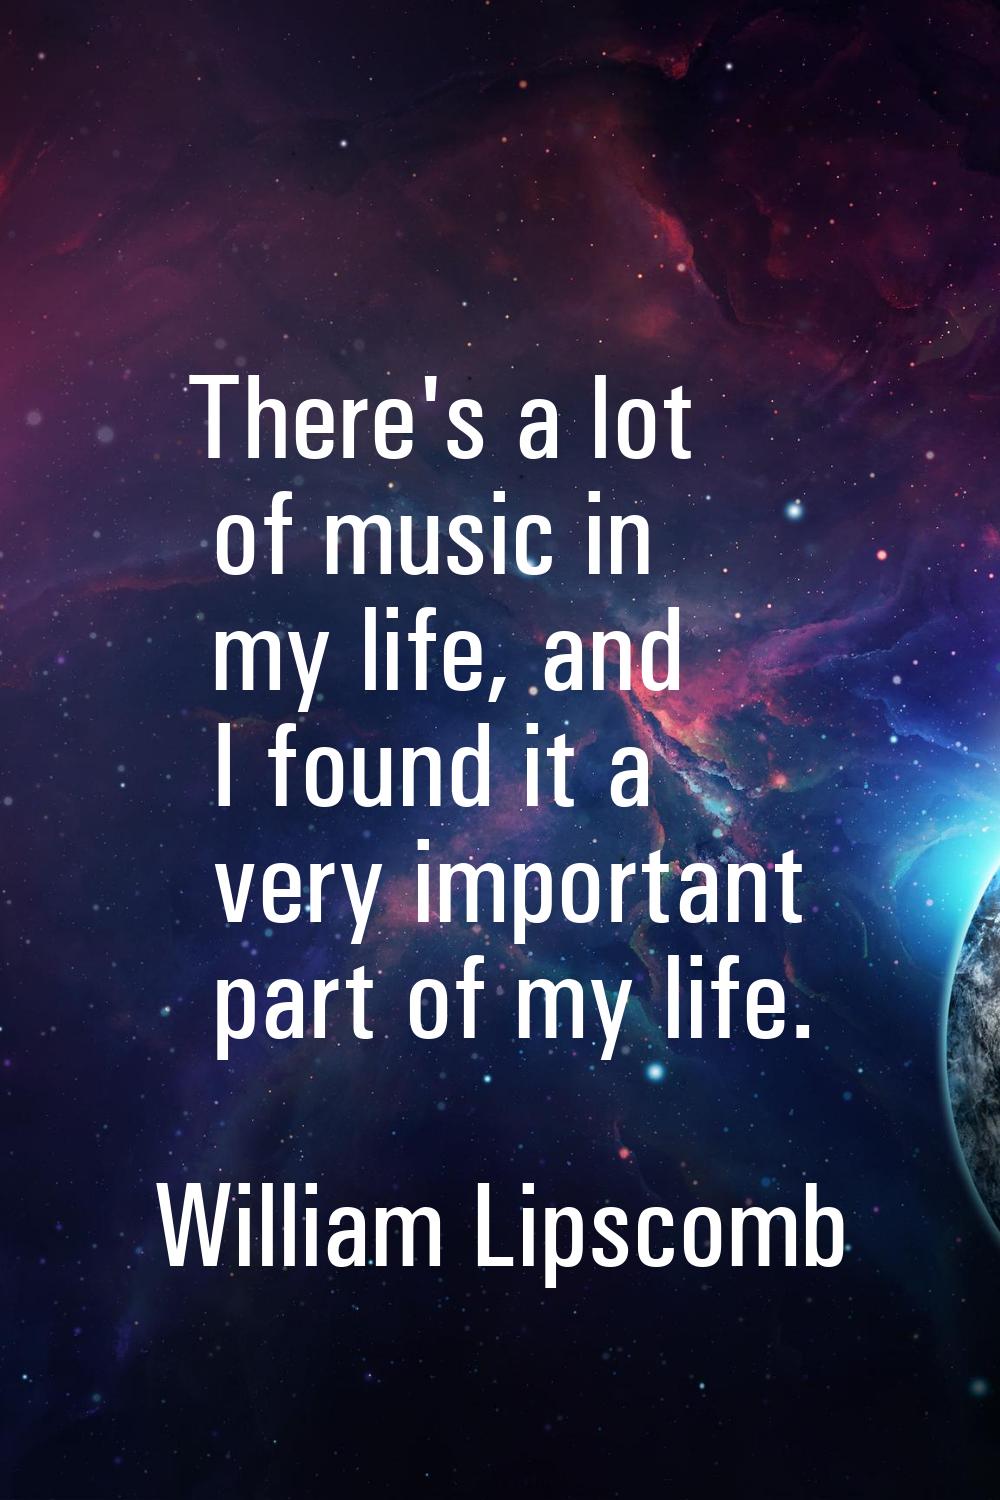 There's a lot of music in my life, and I found it a very important part of my life.